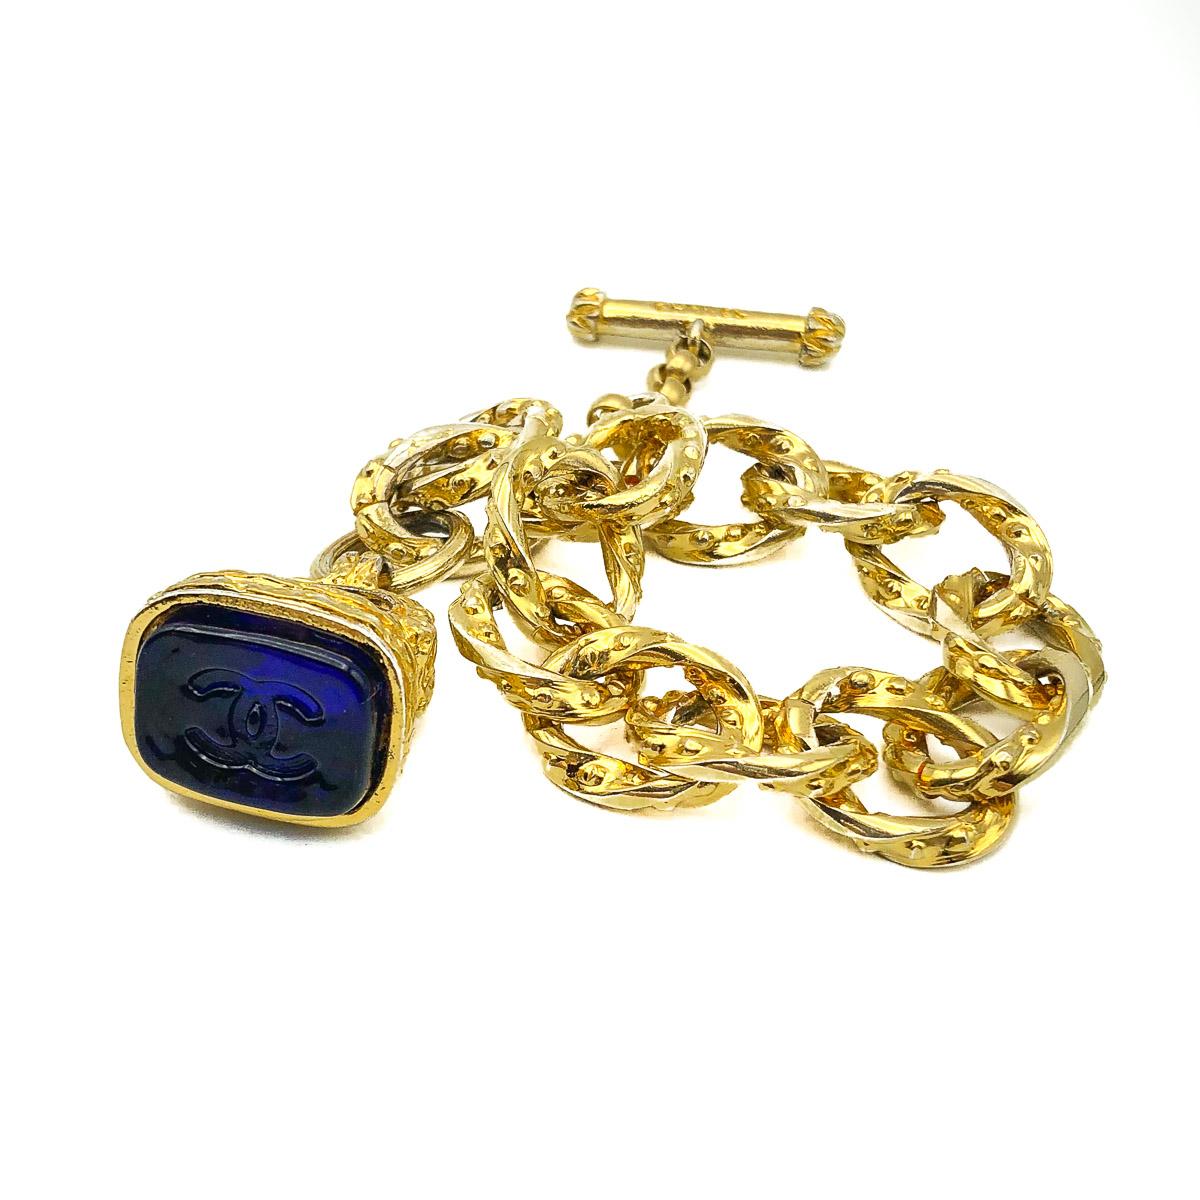 A fabulous Vintage Chanel Gripoix Bracelet originating from the 90s heyday of Lagerfeld and Victoire de Castellane. Featuring large open chased gold plated links with an ornate wax seal style fob set with a large blue pate de verre CC logo stone.